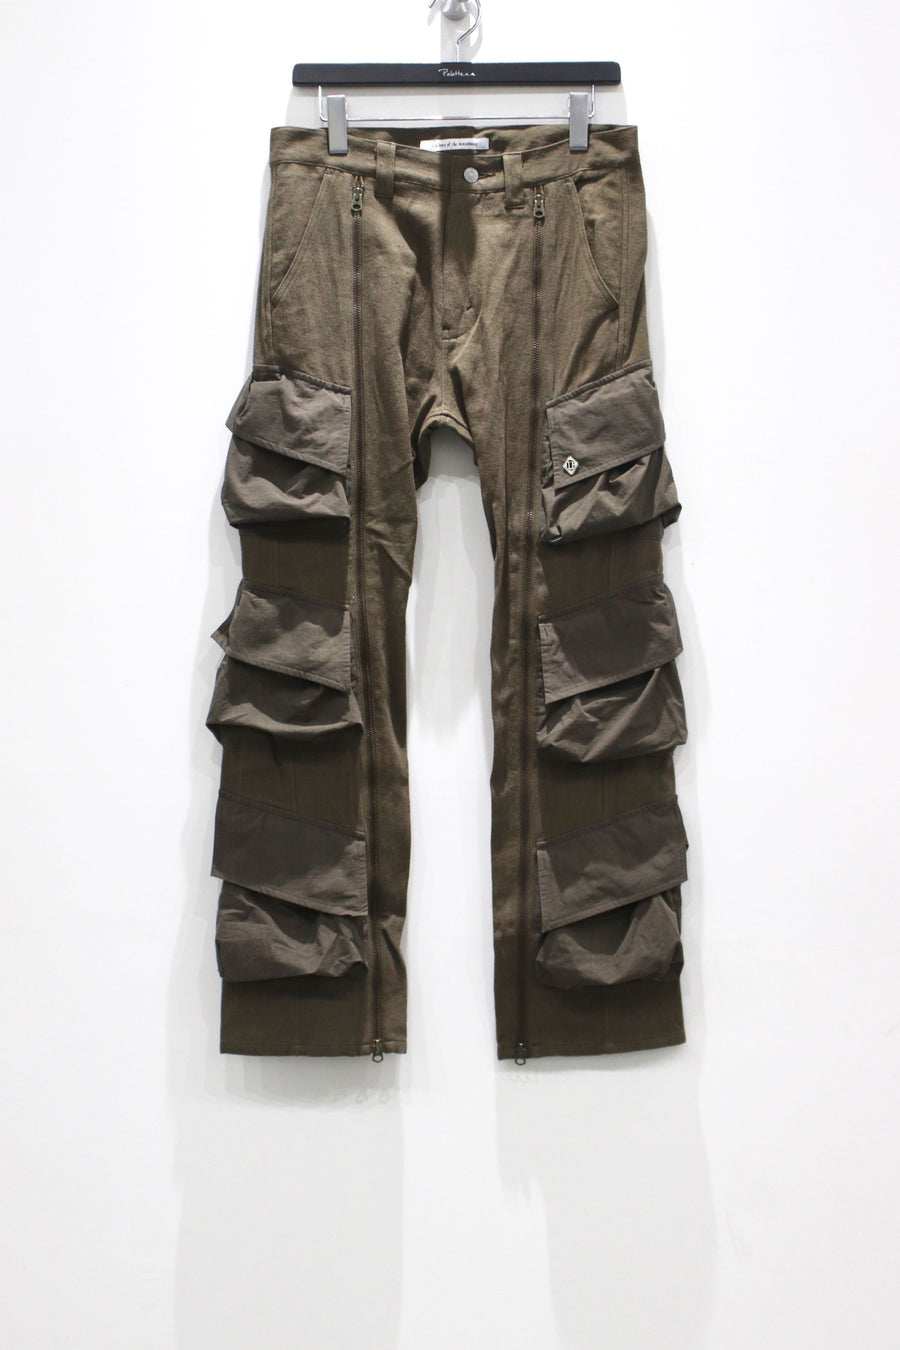 Children of the discordance TROUSERS 2 - パンツ